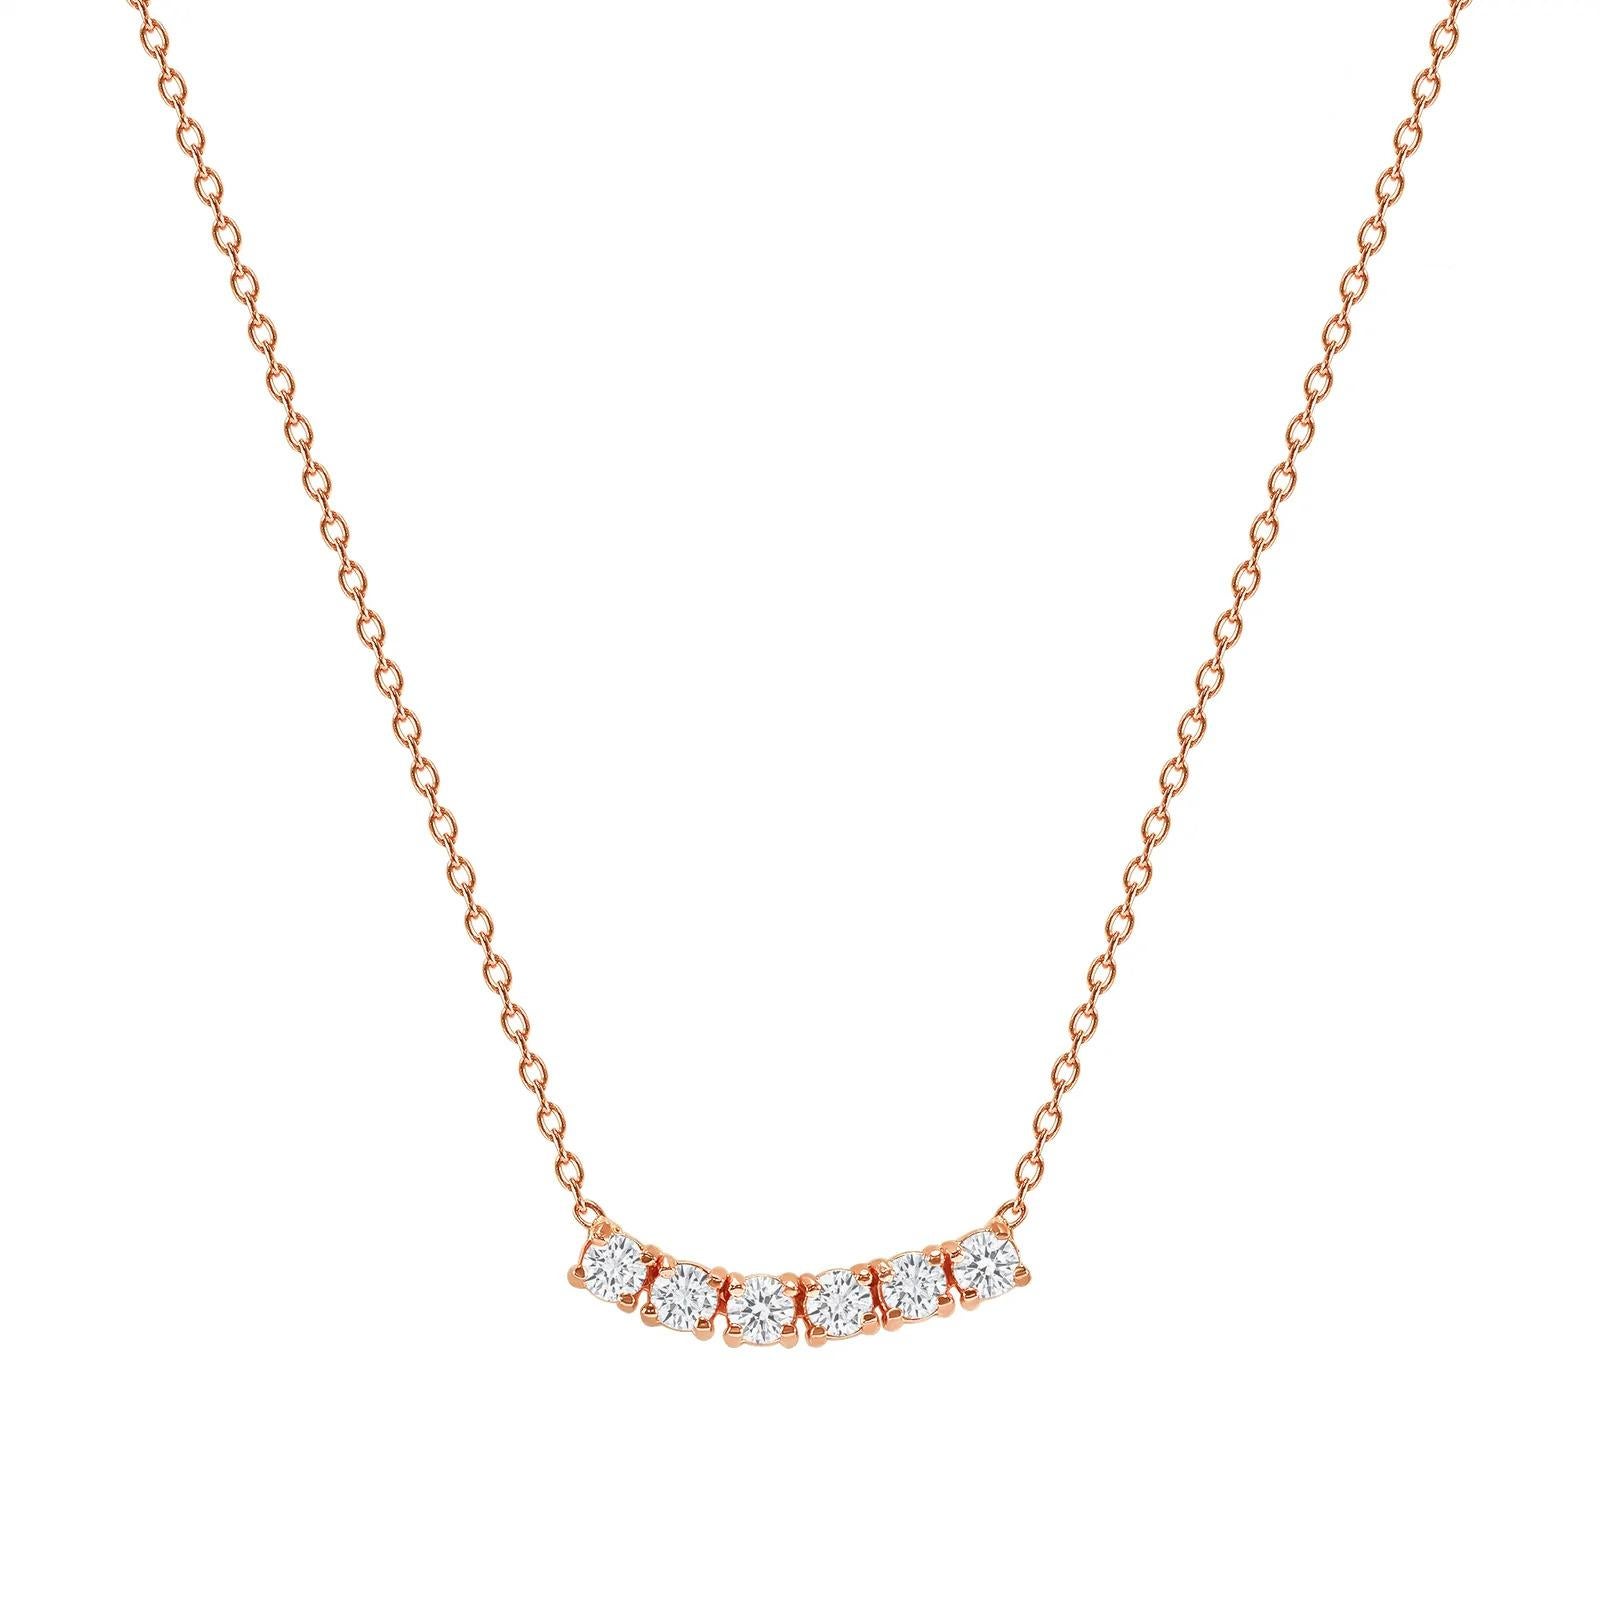 This petite, curved diamond necklace is crafted with gorgeous 14k gold set with six round diamonds.  

Gold: 14k 
Diamond Total Carats: 2 ct
Diamond Cut: Round (6 diamonds)
Diamond Clarity: VS
Diamond Color: F
Color: Rose Gold
Necklace Length: 22